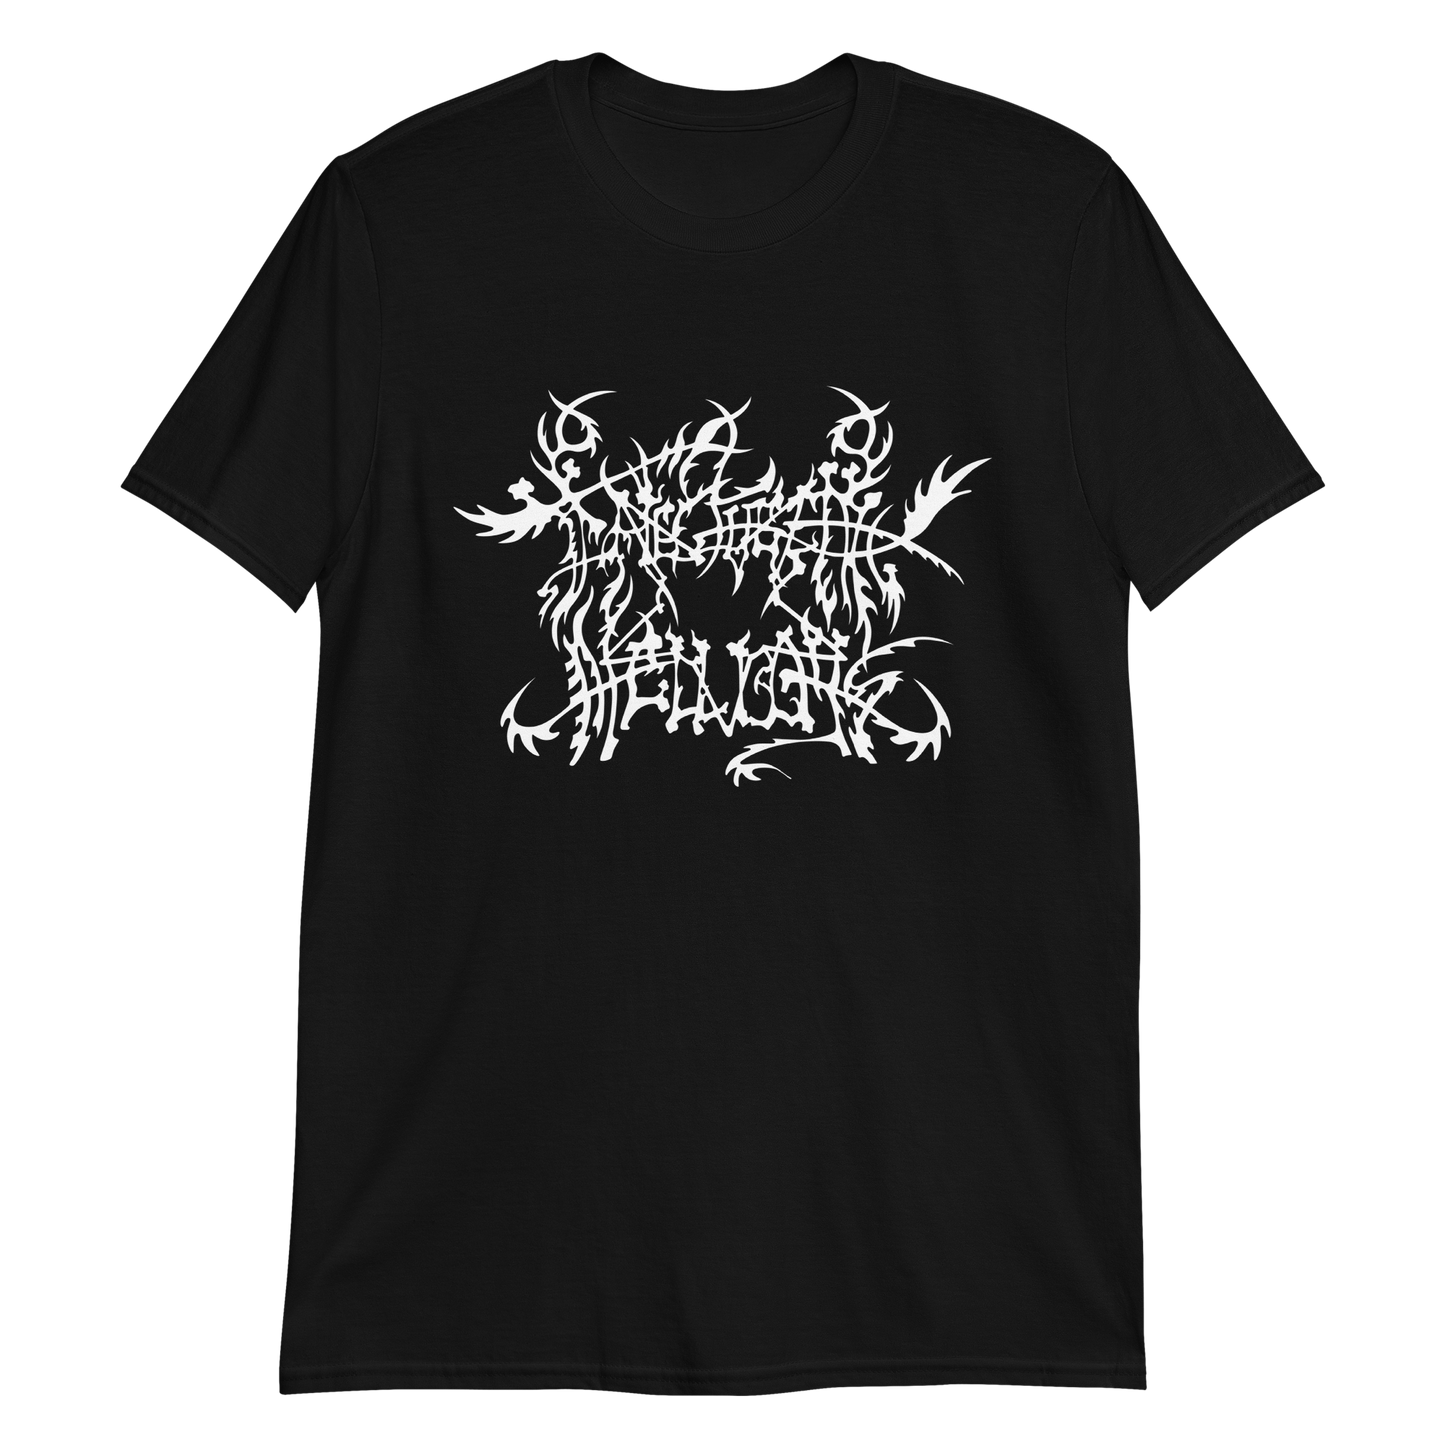 The Give 'Em Hell Boys Grindcore Logo T-Shirt